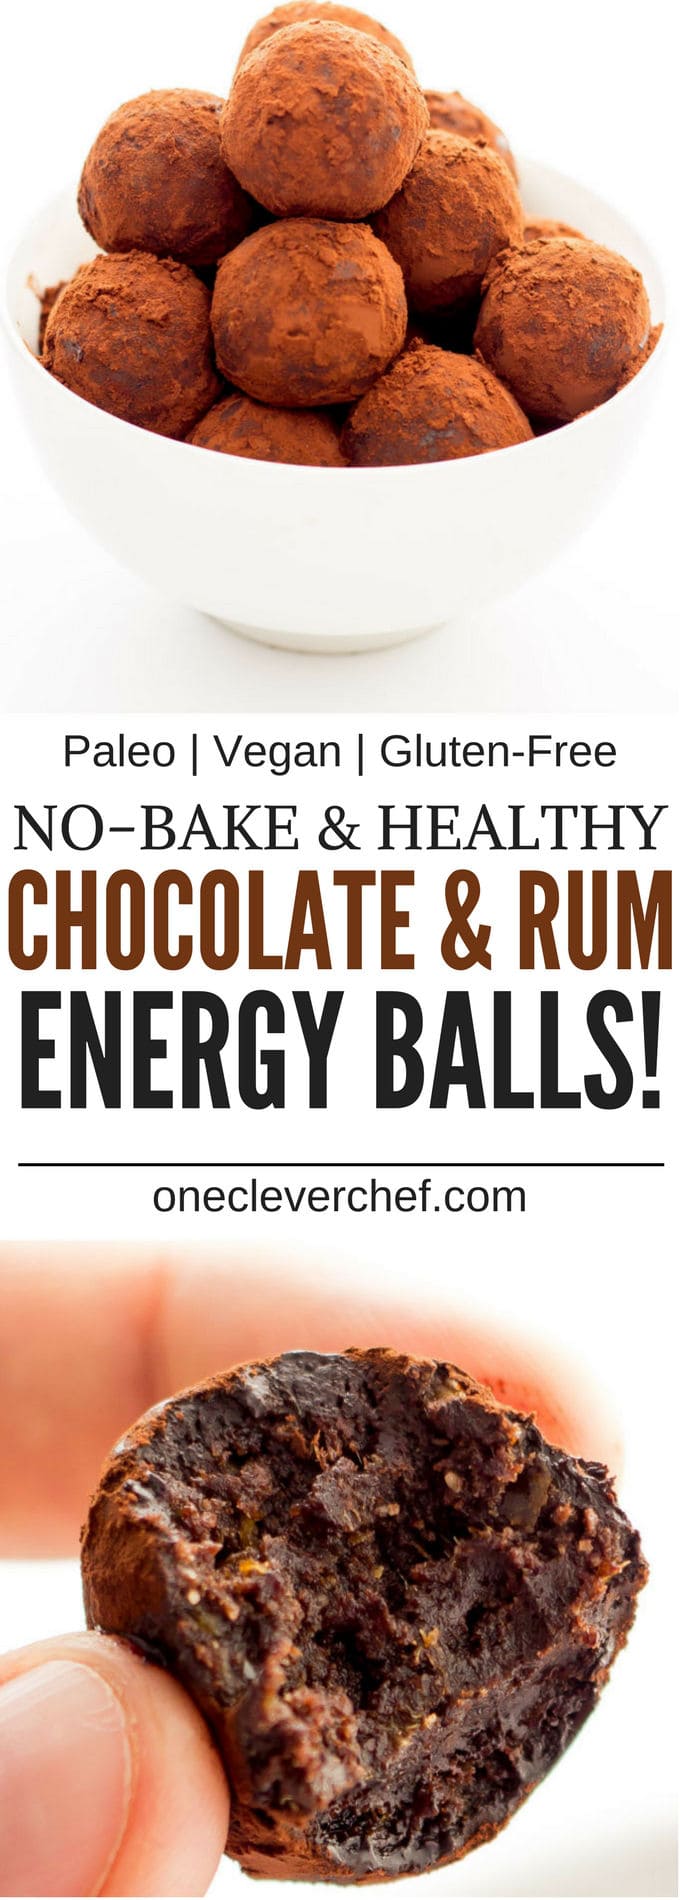 These Healthy Chocolate & Rum Balls are the perfect no-bake snack. They are easy to make, protein-packed and perfect either as a dessert or a post-workout lunch. Made in one bowl and ready under 15 minutes, theya re also paleo, vegan, gluten-free and dairy-free | www.onecleverchef.com